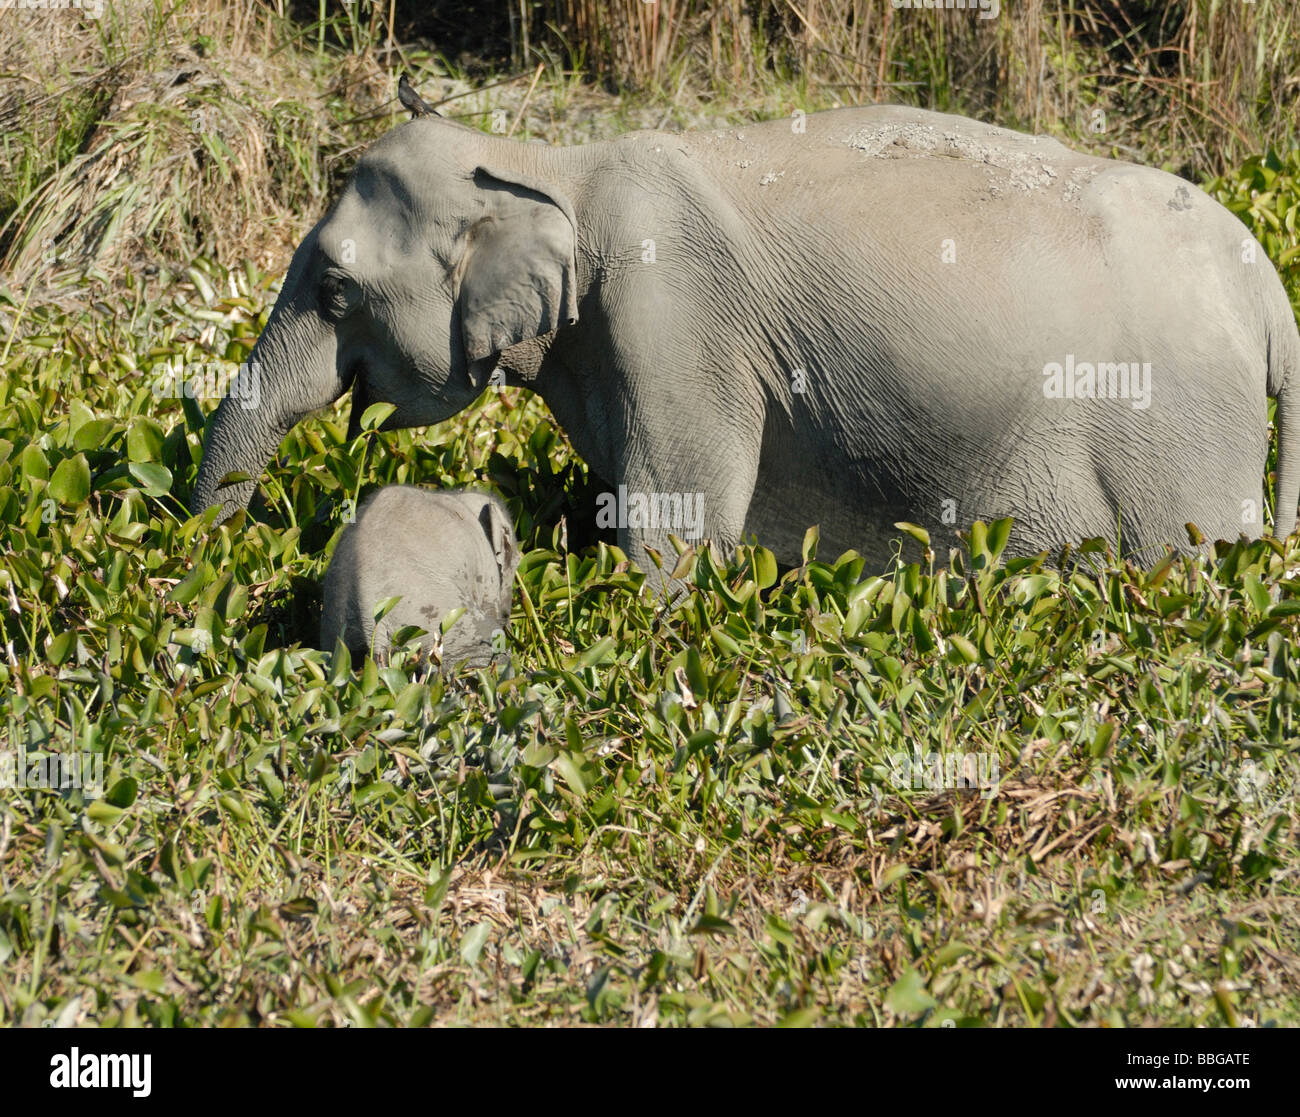 Female wild Indian Elephant (Elephas maximus indicus) with a baby eating water plants at the margins of a lake. Stock Photo